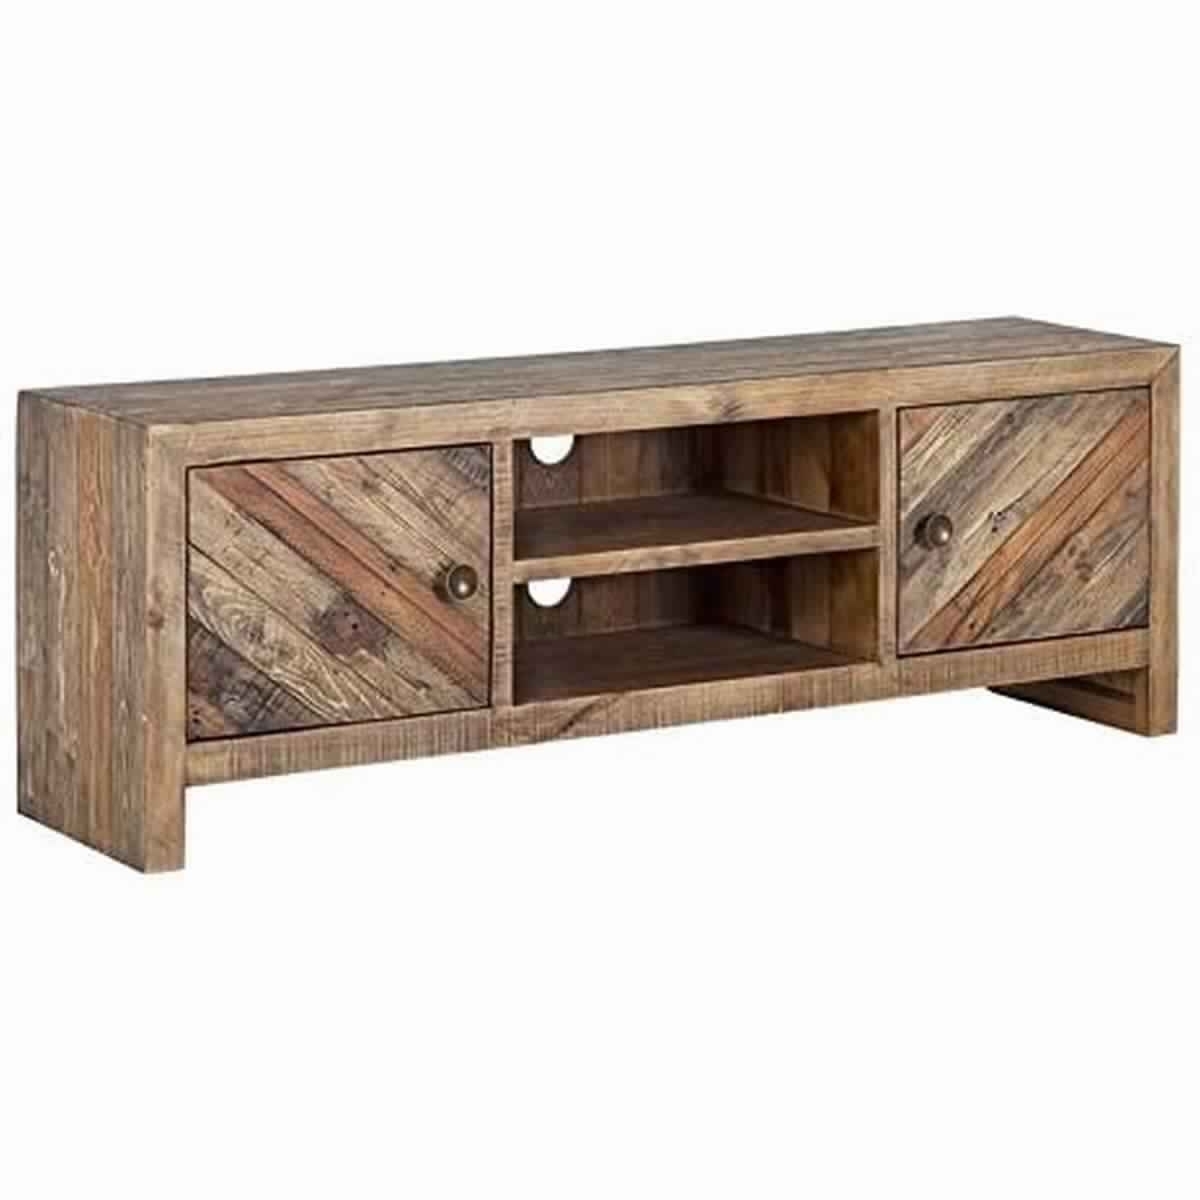 Wooden TV Console With 2 Cabinets And Open Center Shelf, Weathered Brown- Saltoro Sherpi